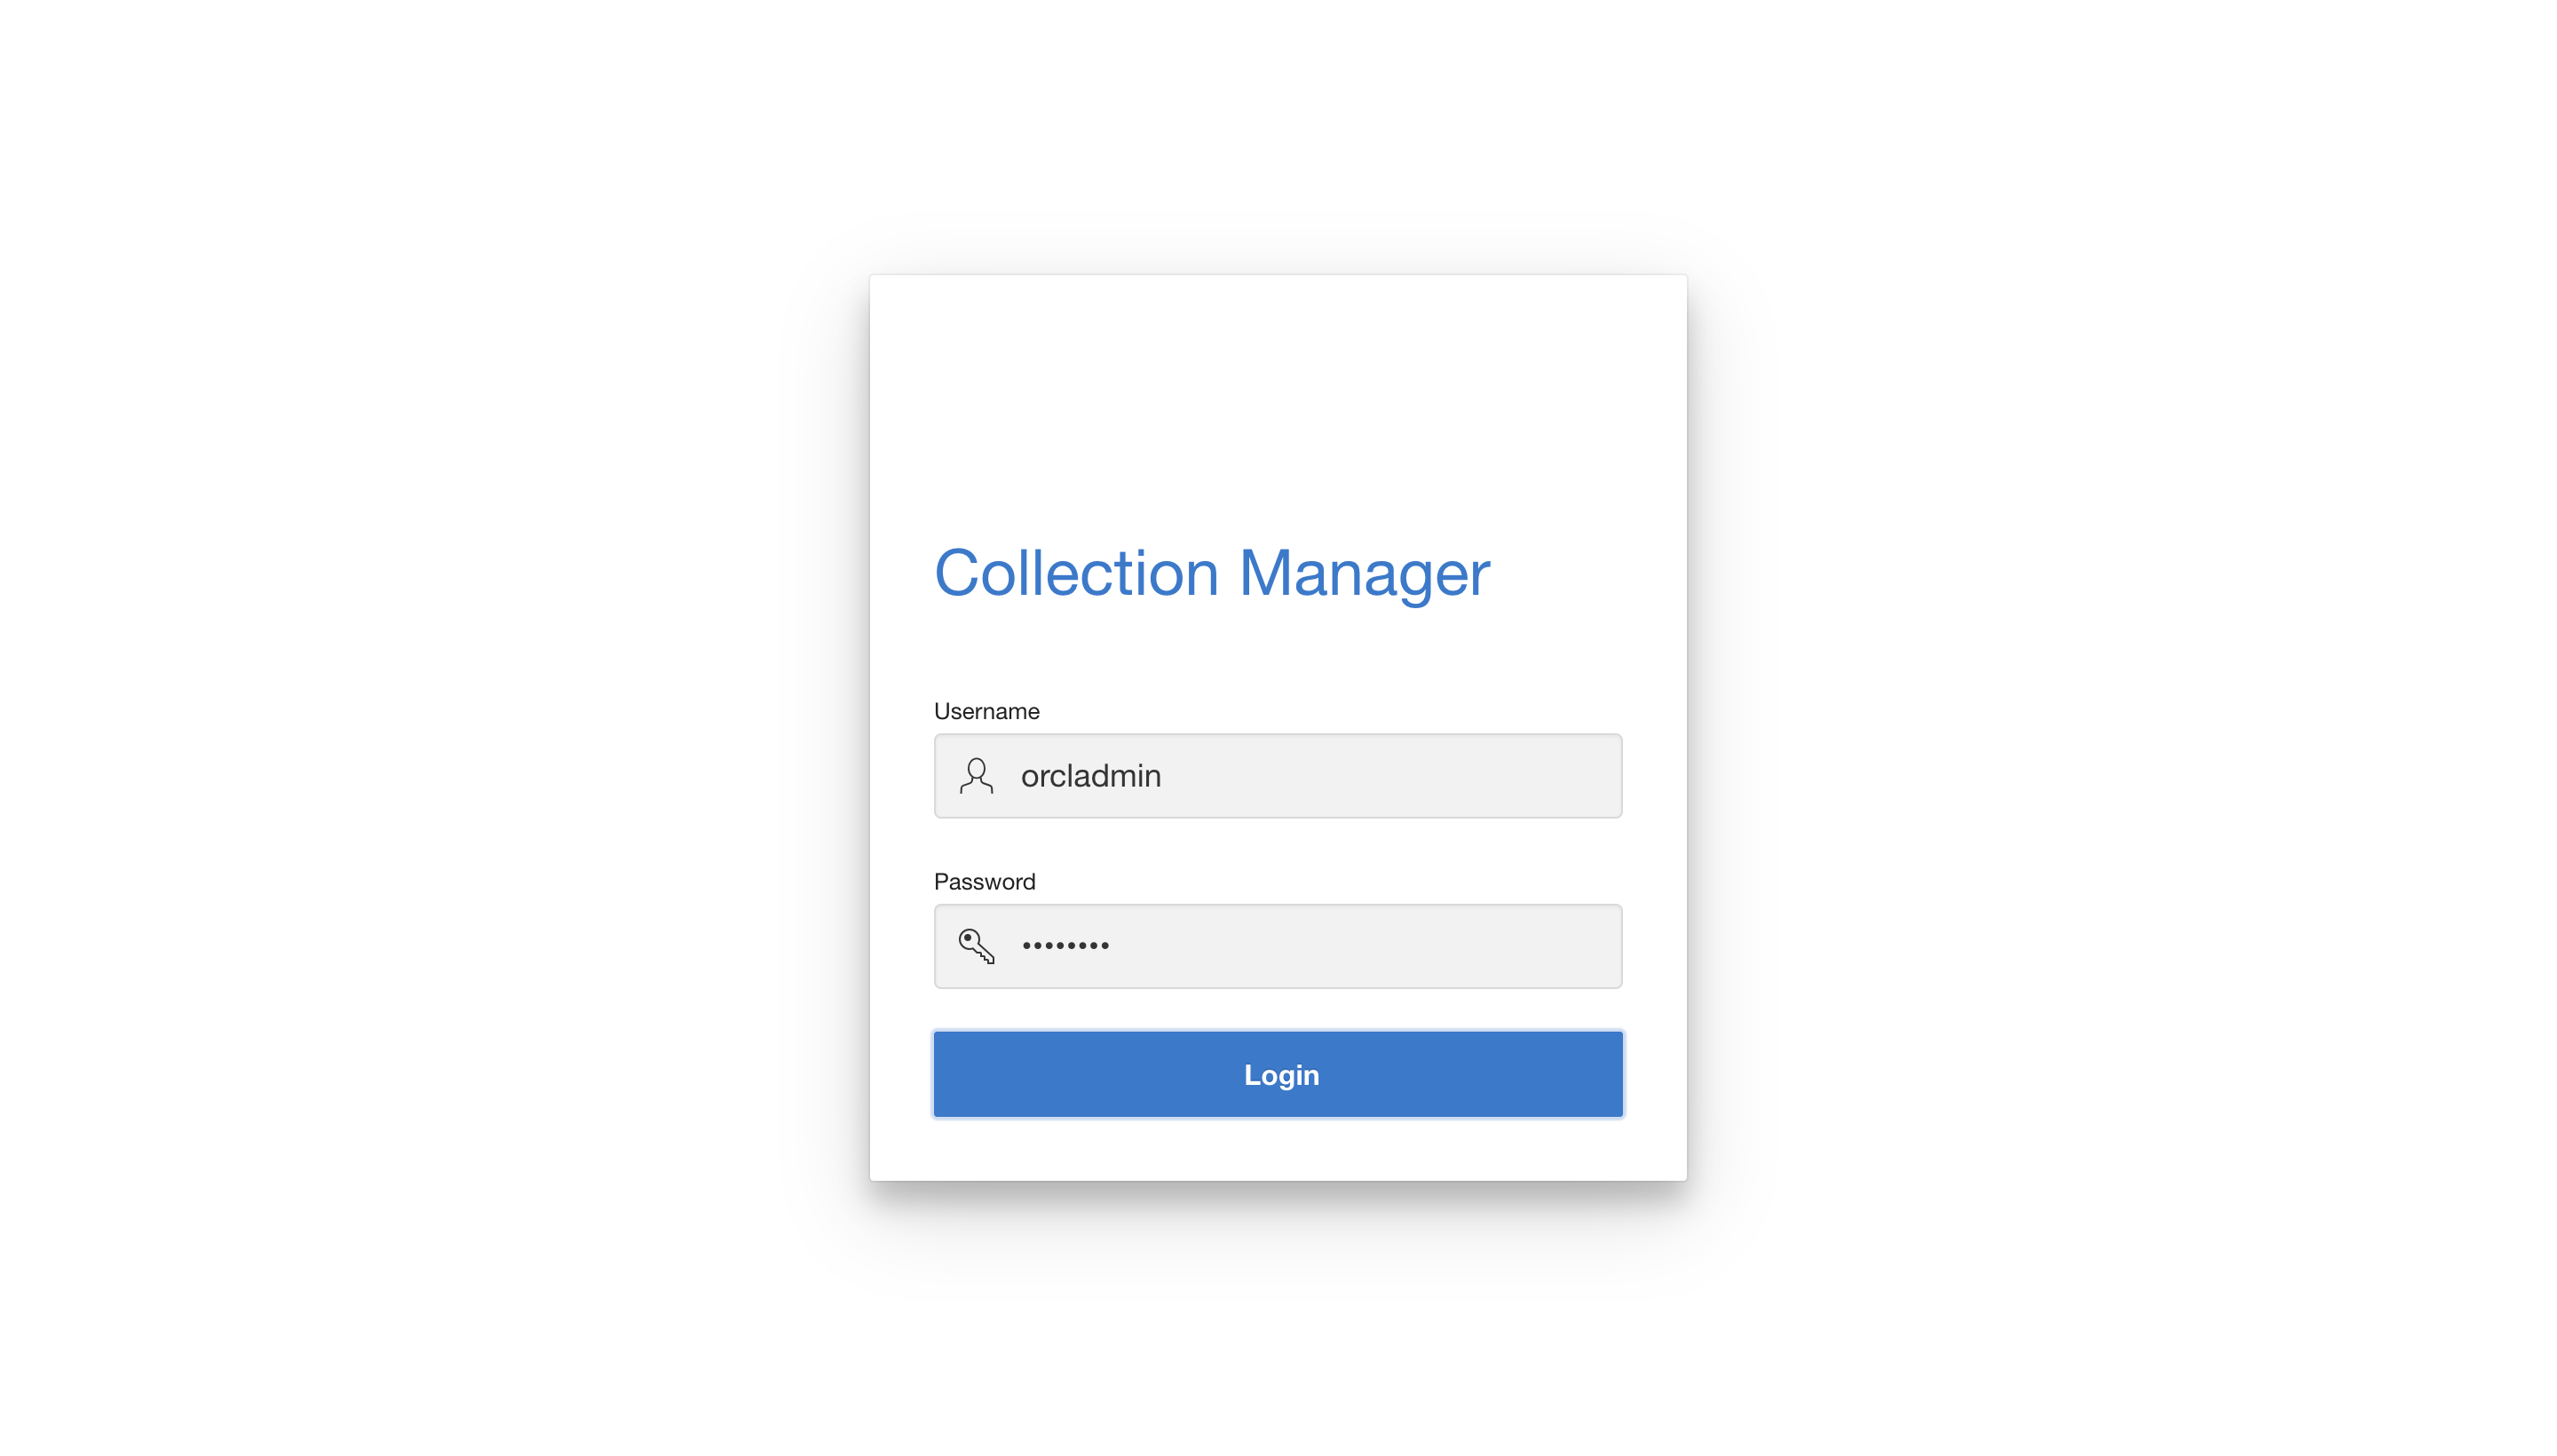 This image illustrates logging in to Collection Manager.